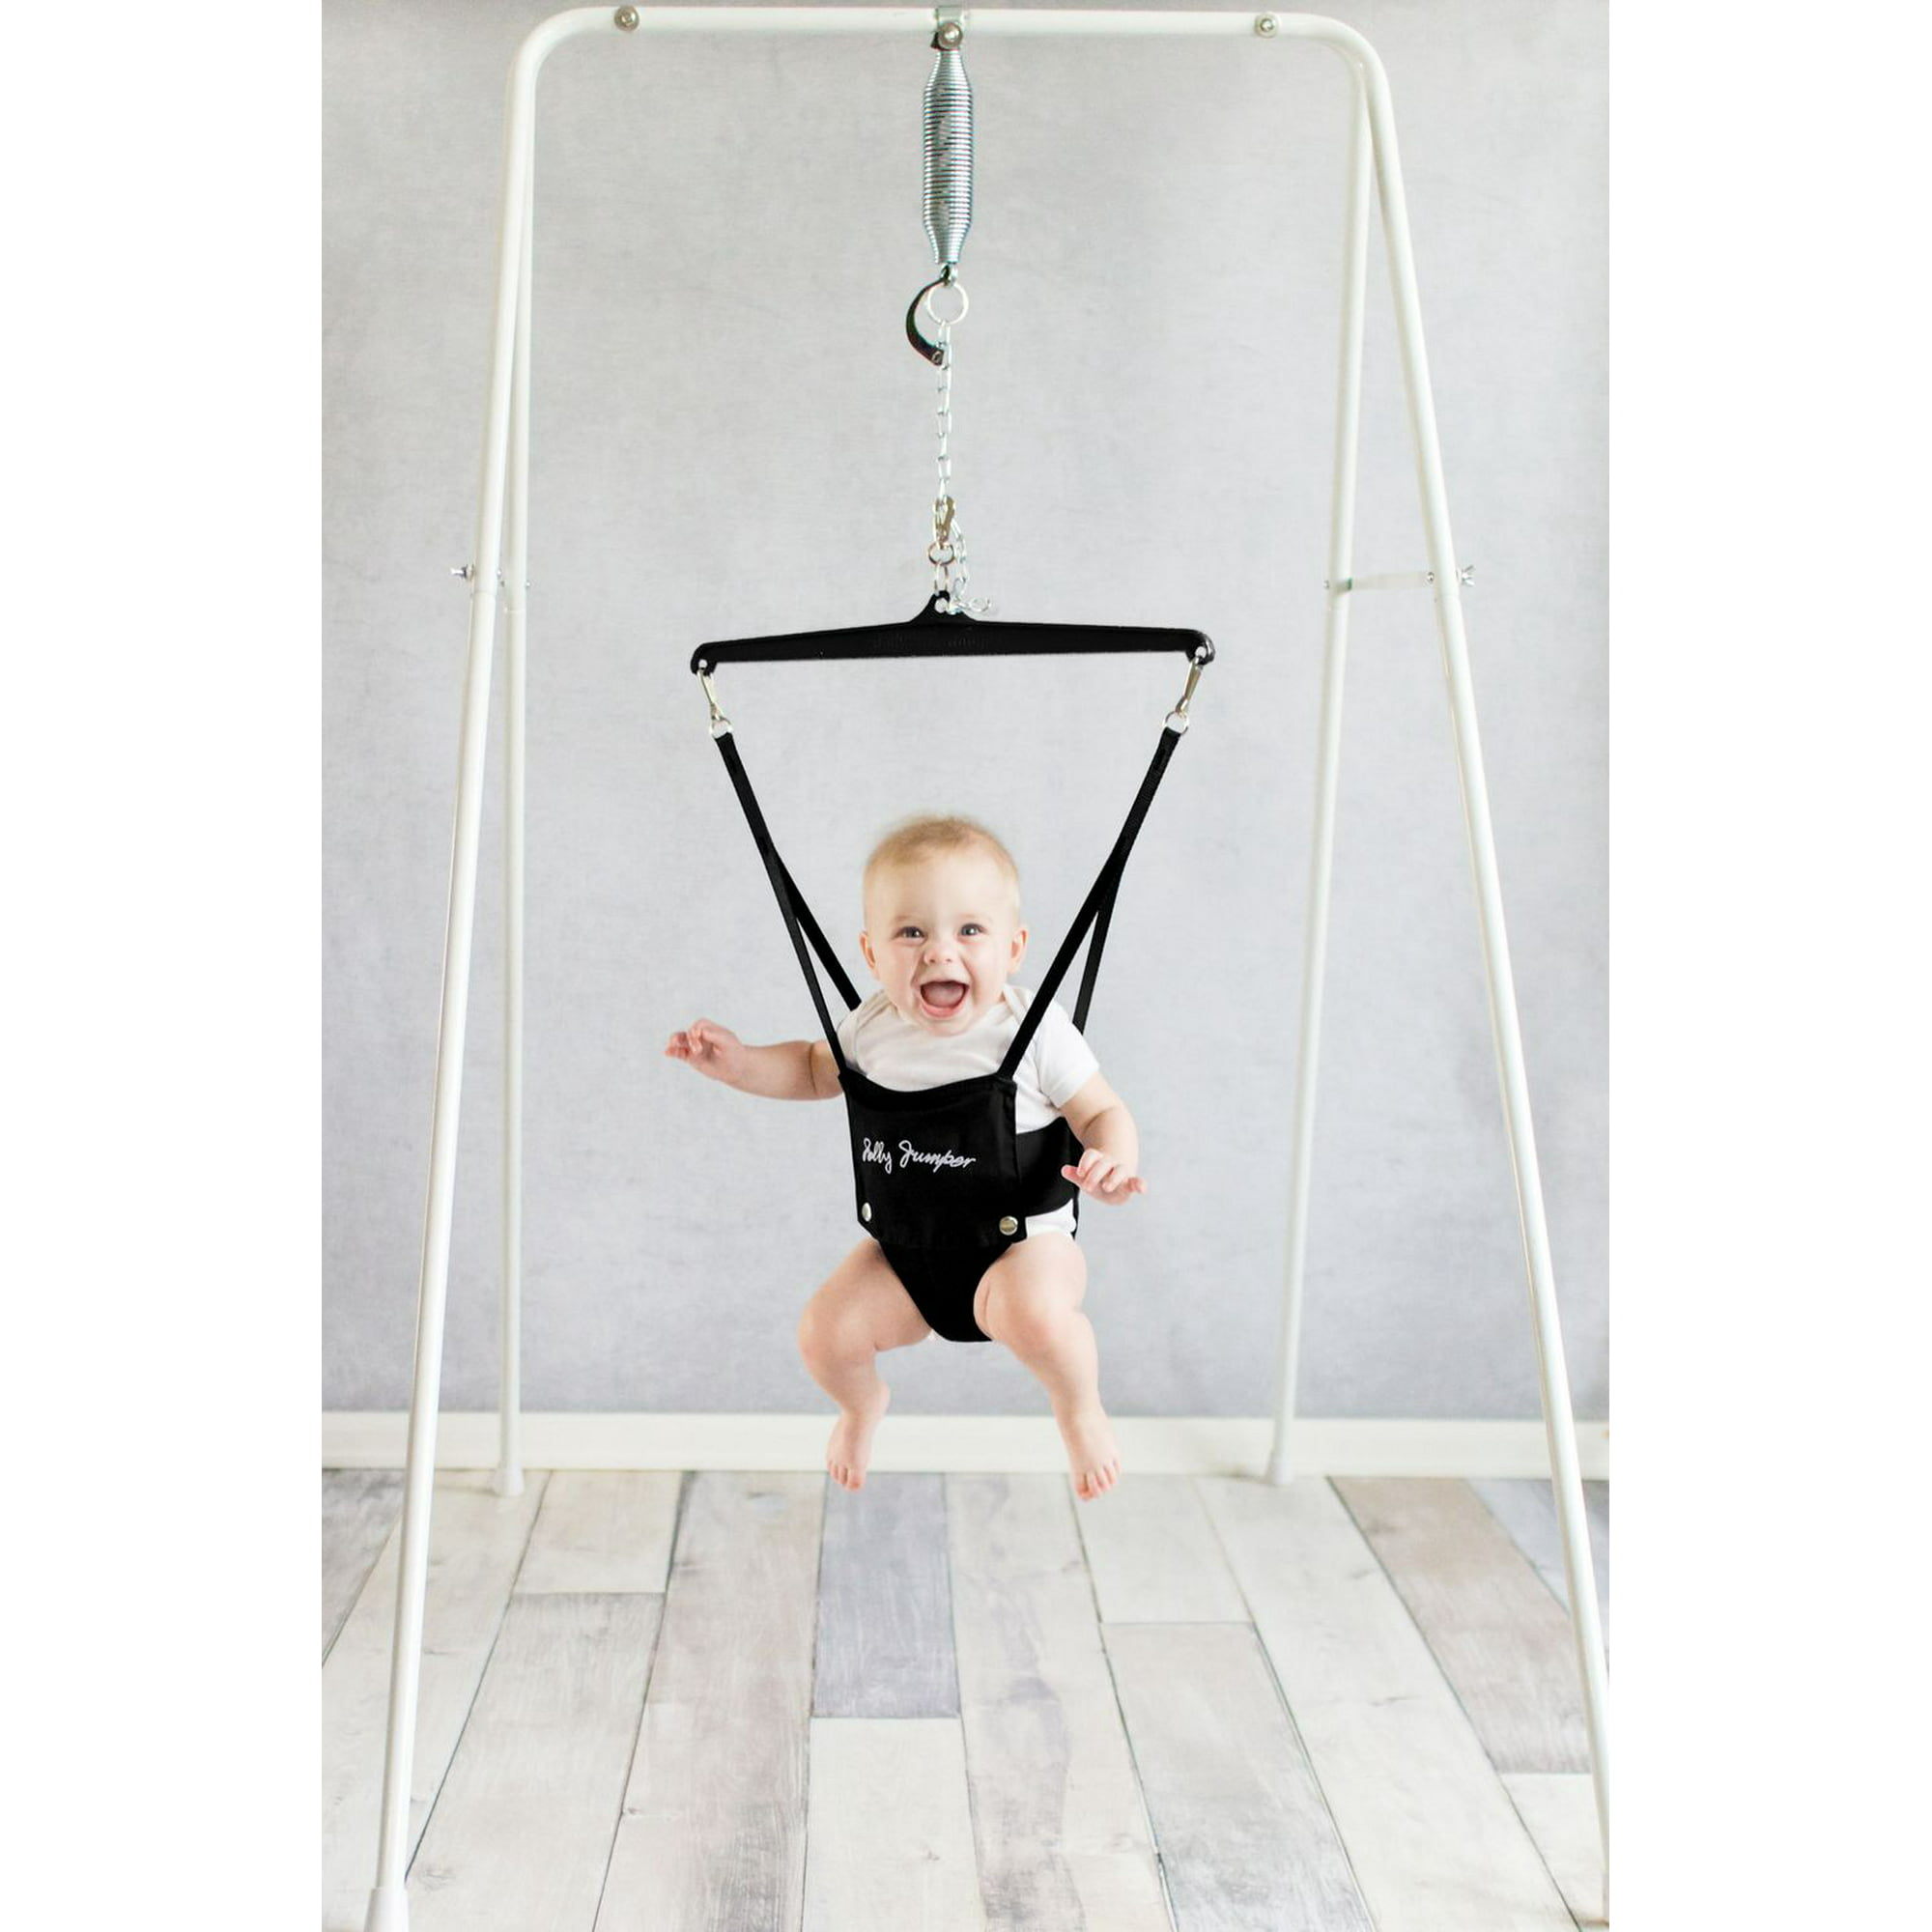 Jolly Jumper *CLASSIC*, Original Baby Exerciser with Stand 